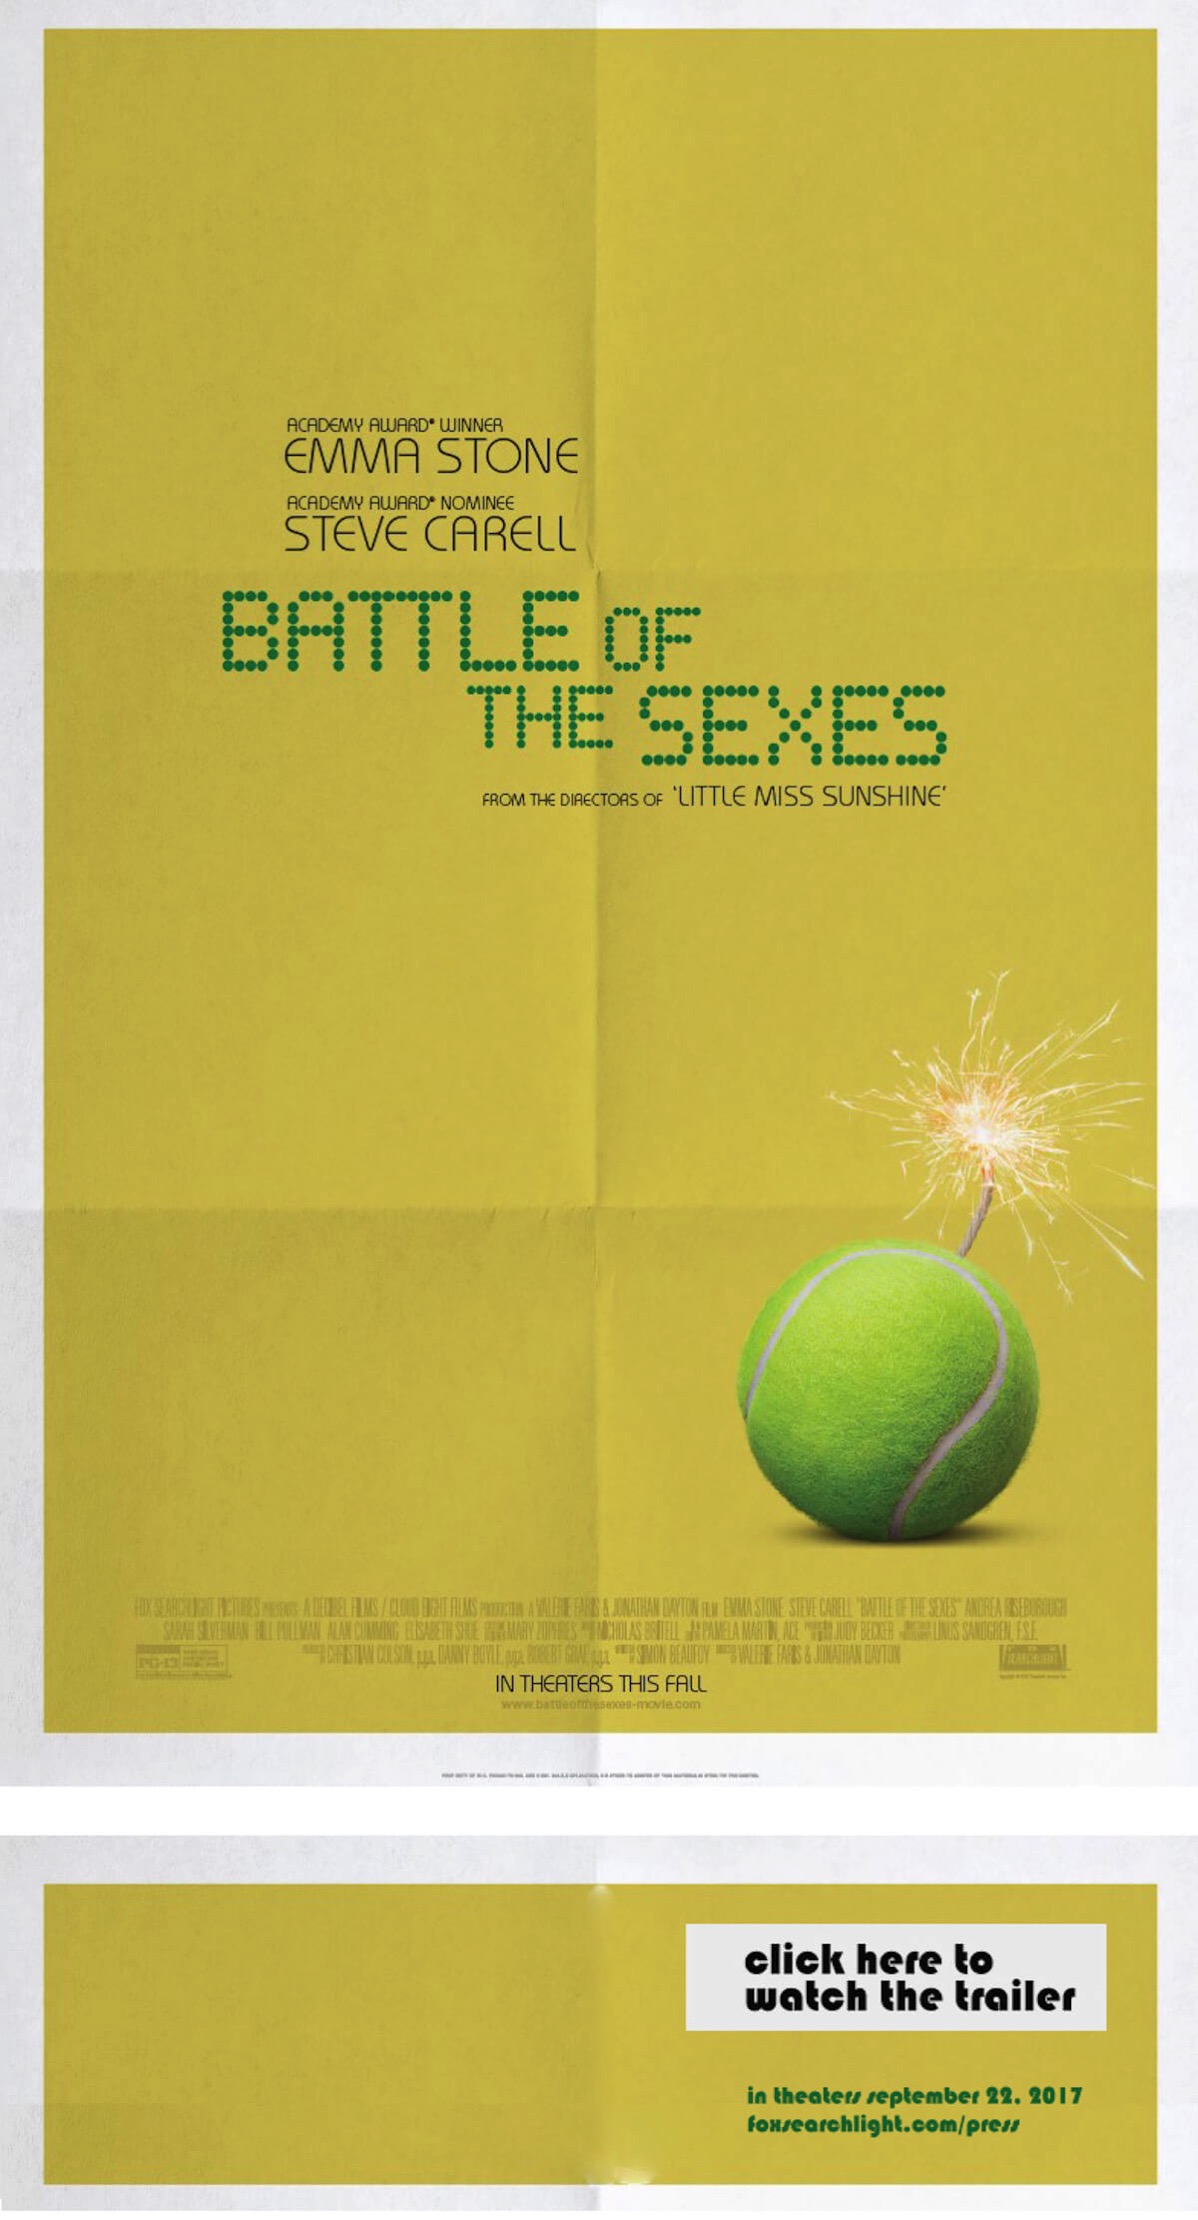 Battle of the sexes poster